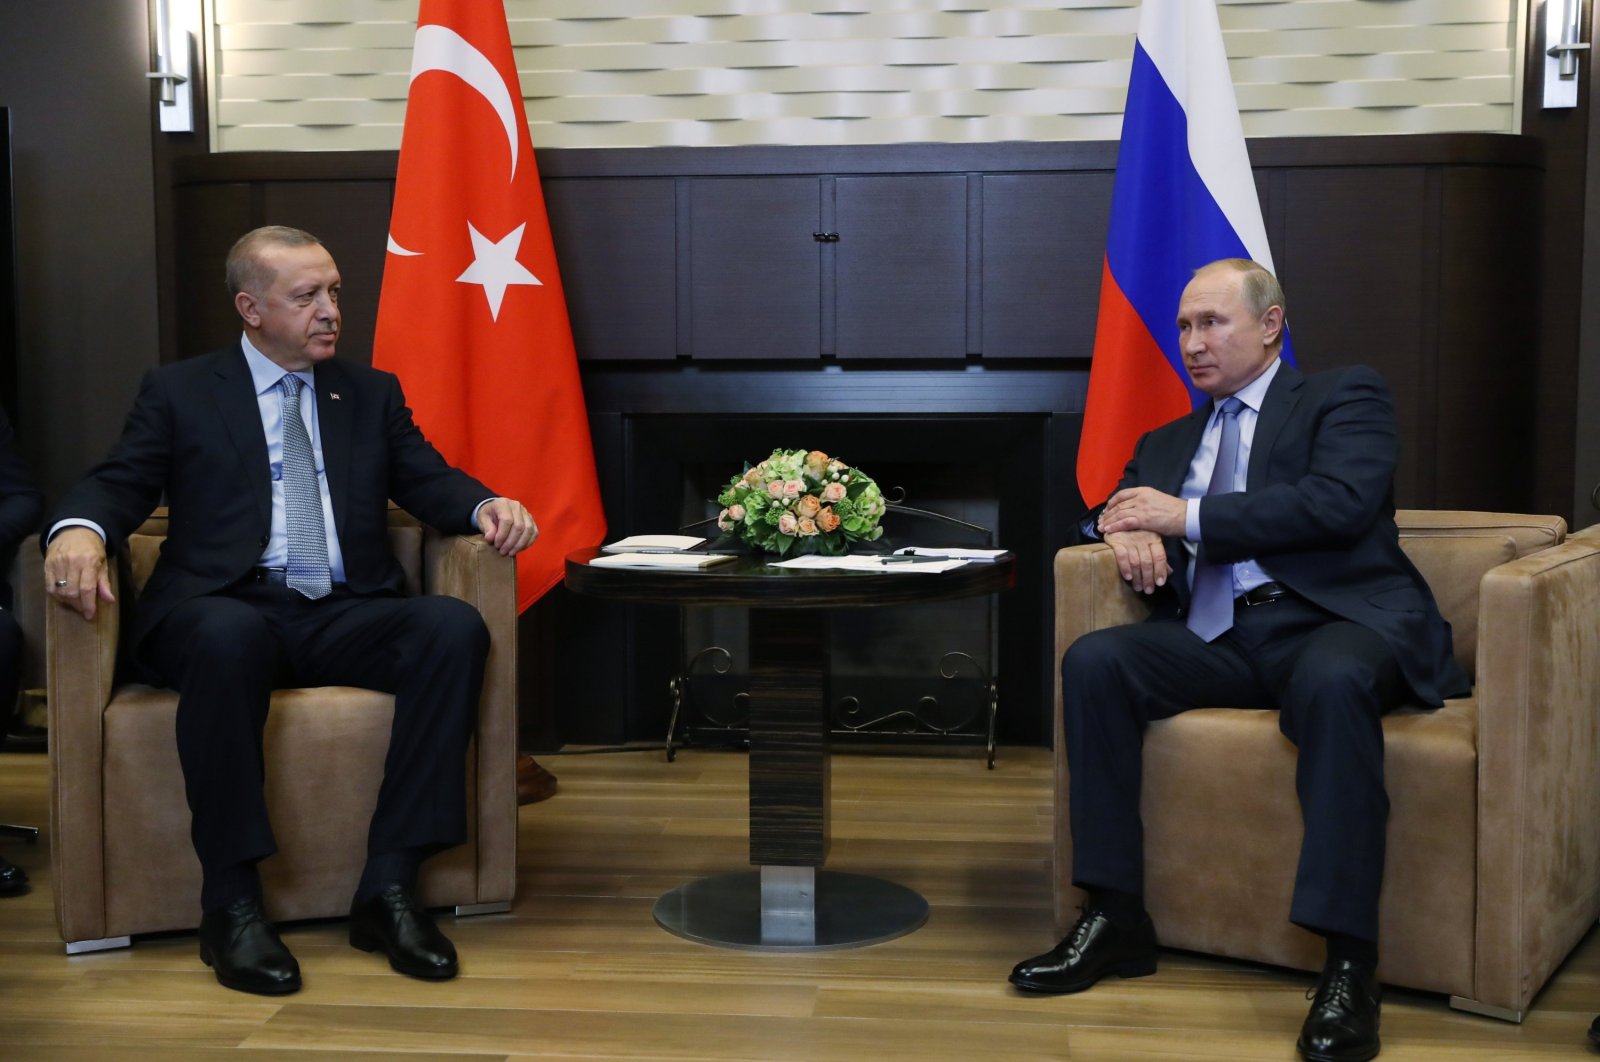 President Recep Tayyip Erdoğan attends a meeting with his Russian counterpart Vladimir Putin in Sochi, Russia, Sept. 29, 2021. (Reuters Photo)